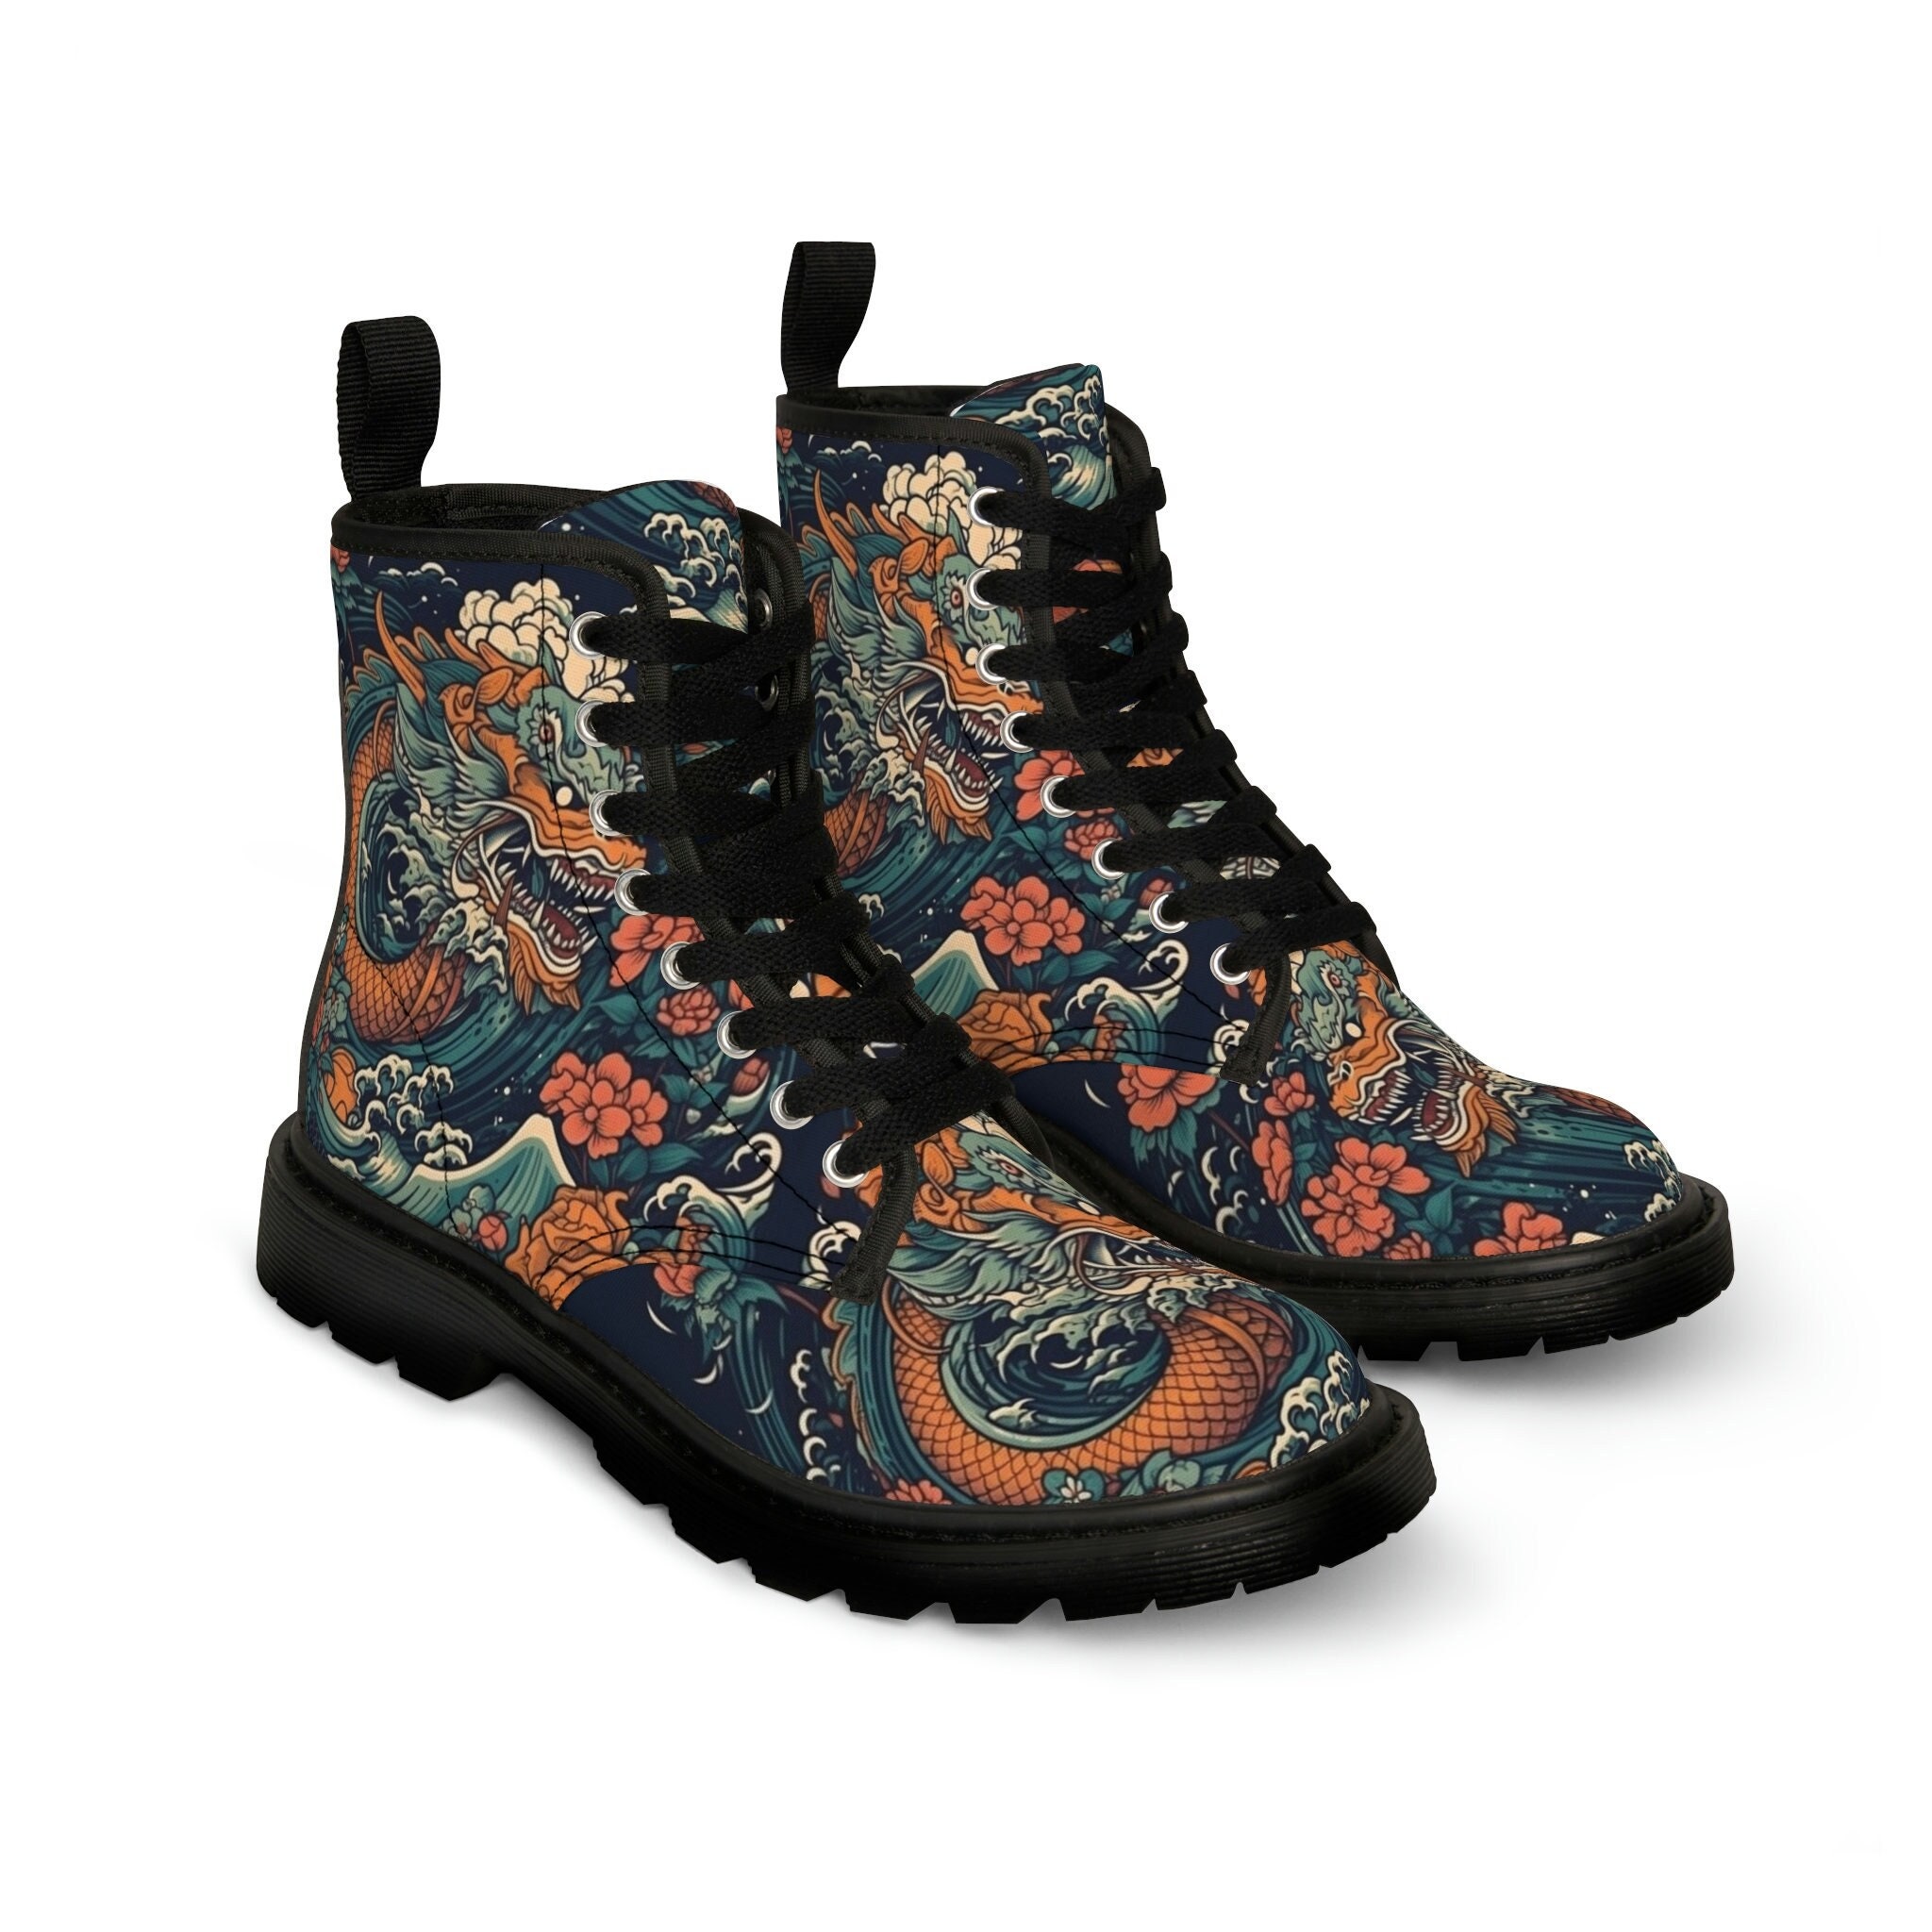 Wabori Dragon Tattoo Women's Canvas Boots Gift for Her - Etsy